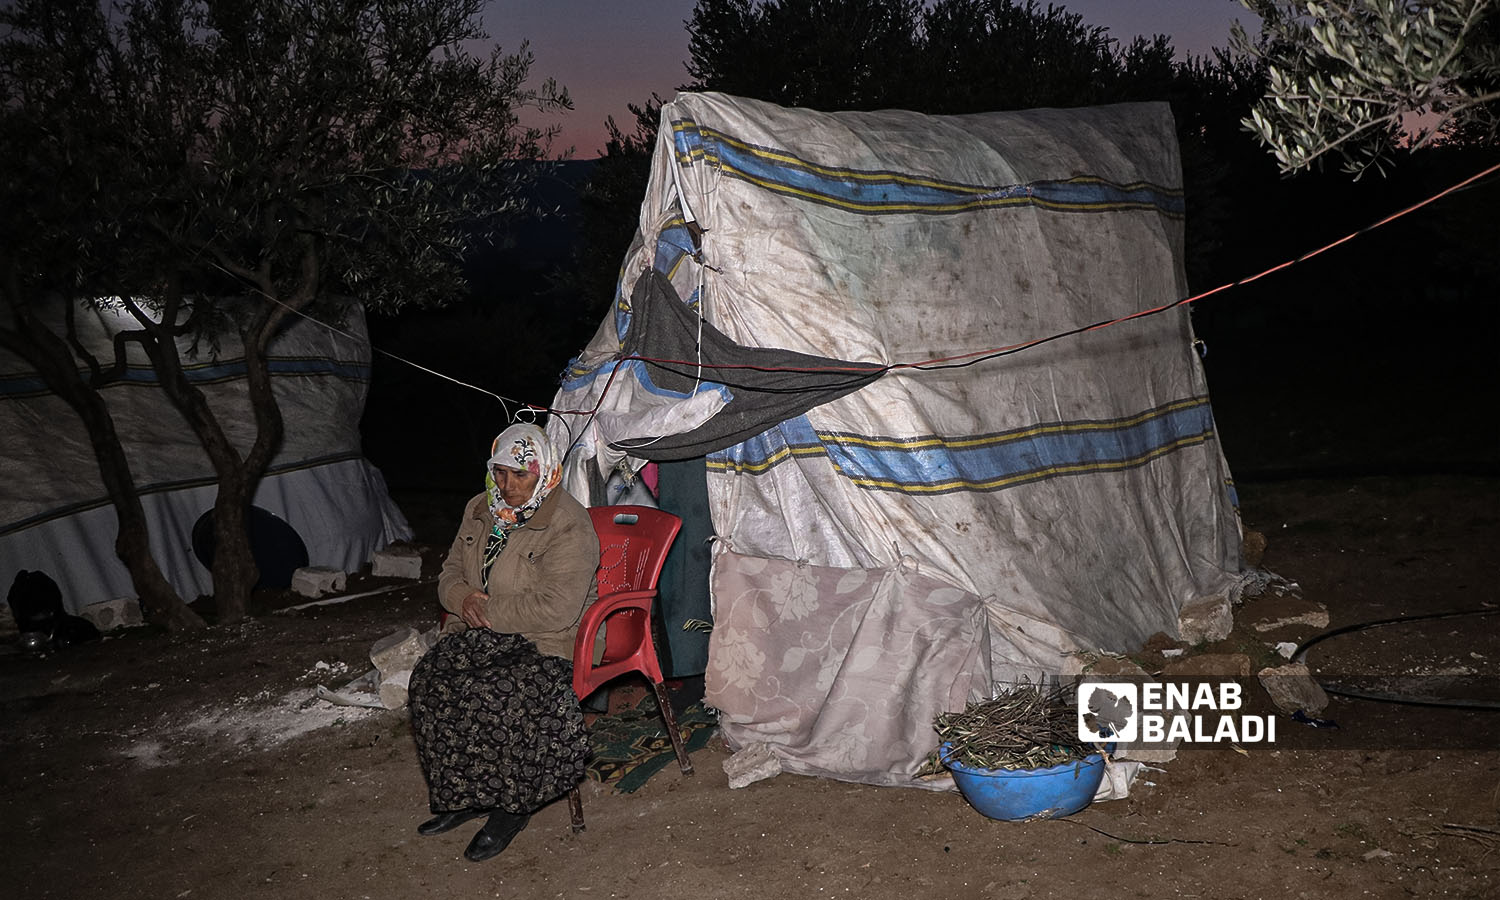 A woman displaced from her home due to the earthquake that struck northwestern Syria, stranded across agricultural land in the village of al-Hamzia in the countryside of Salqin, northern Syria - February 12, 2023 (Enab Baladi/Mohammad Nasan Dabel)